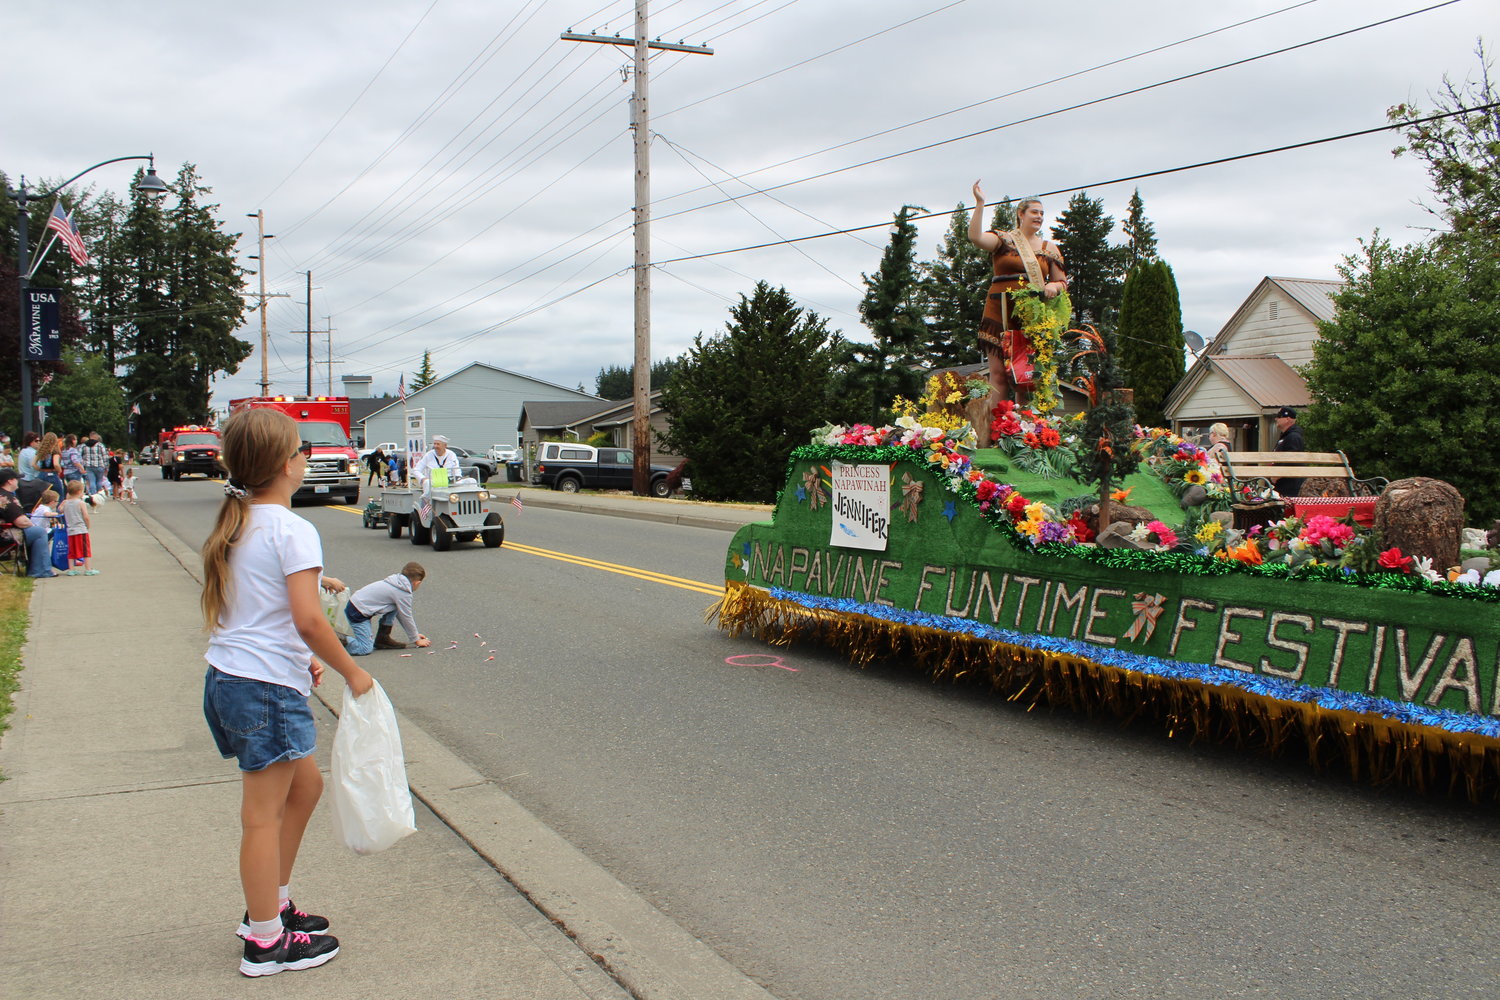 A young paradegoer watches as Princess Napawinah, Jennifer Keevy, 15, rides in the official Napavine Funtime Festival parade float in Saturday's 49th annual Napavine Funtime Festival parade.